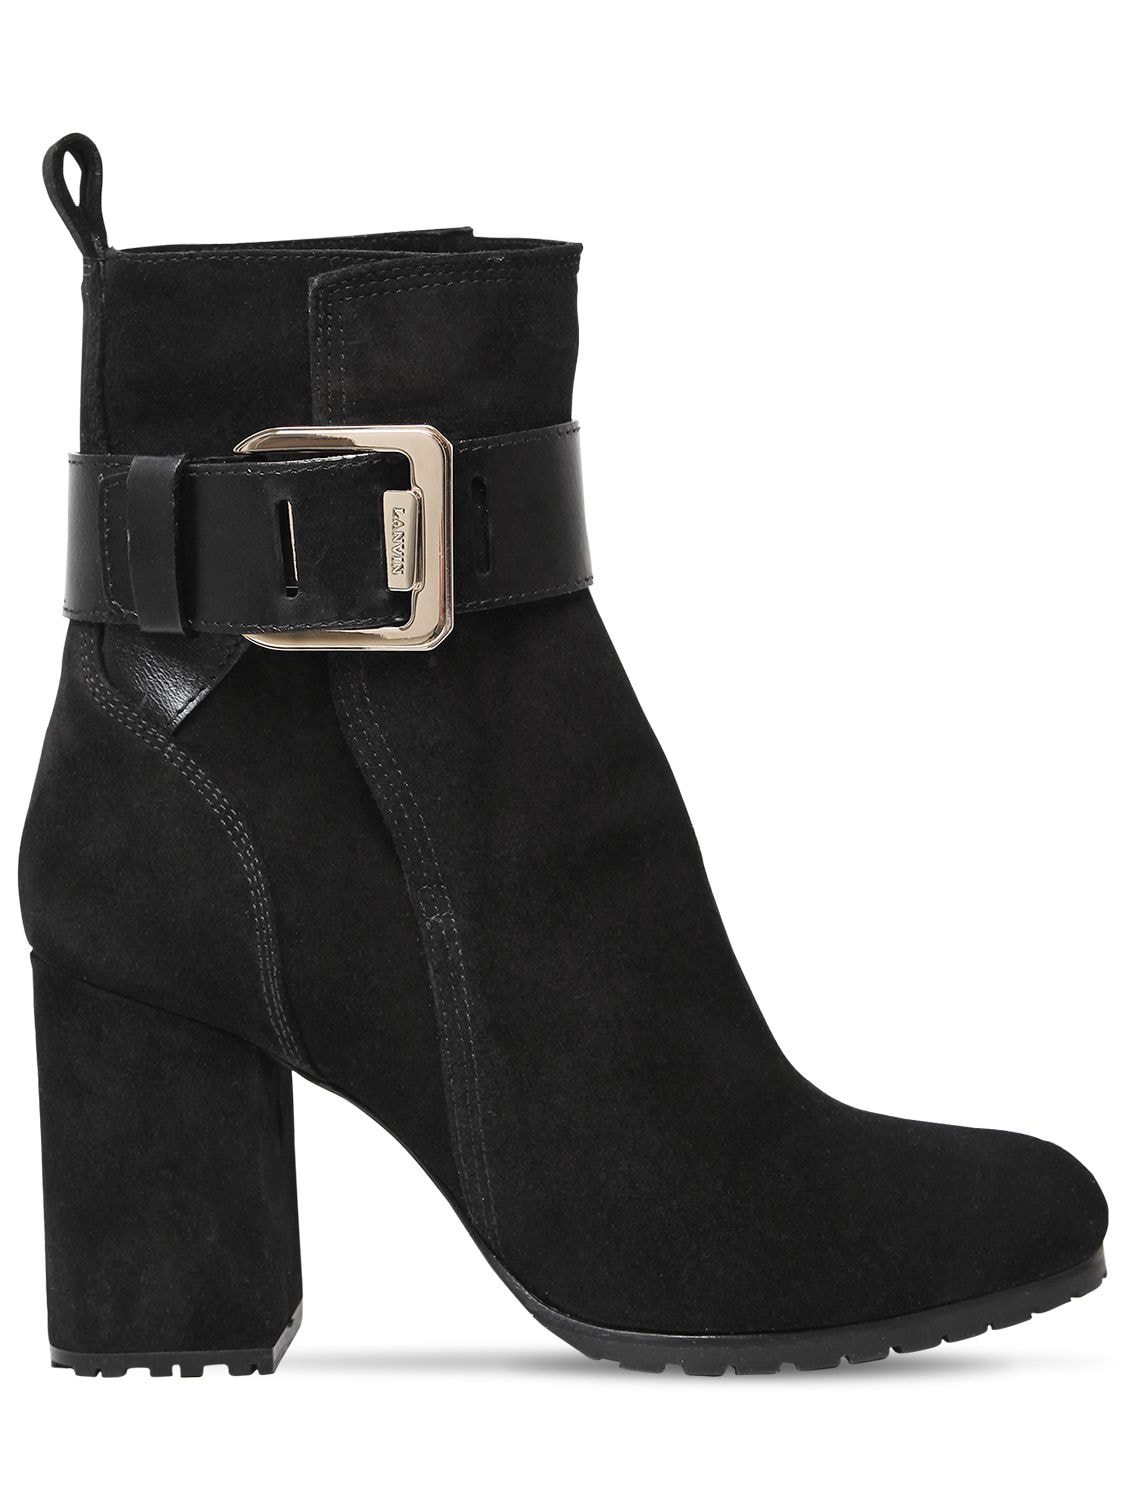 Lanvin 85mm Square Buckle Suede Ankle Boots In Black